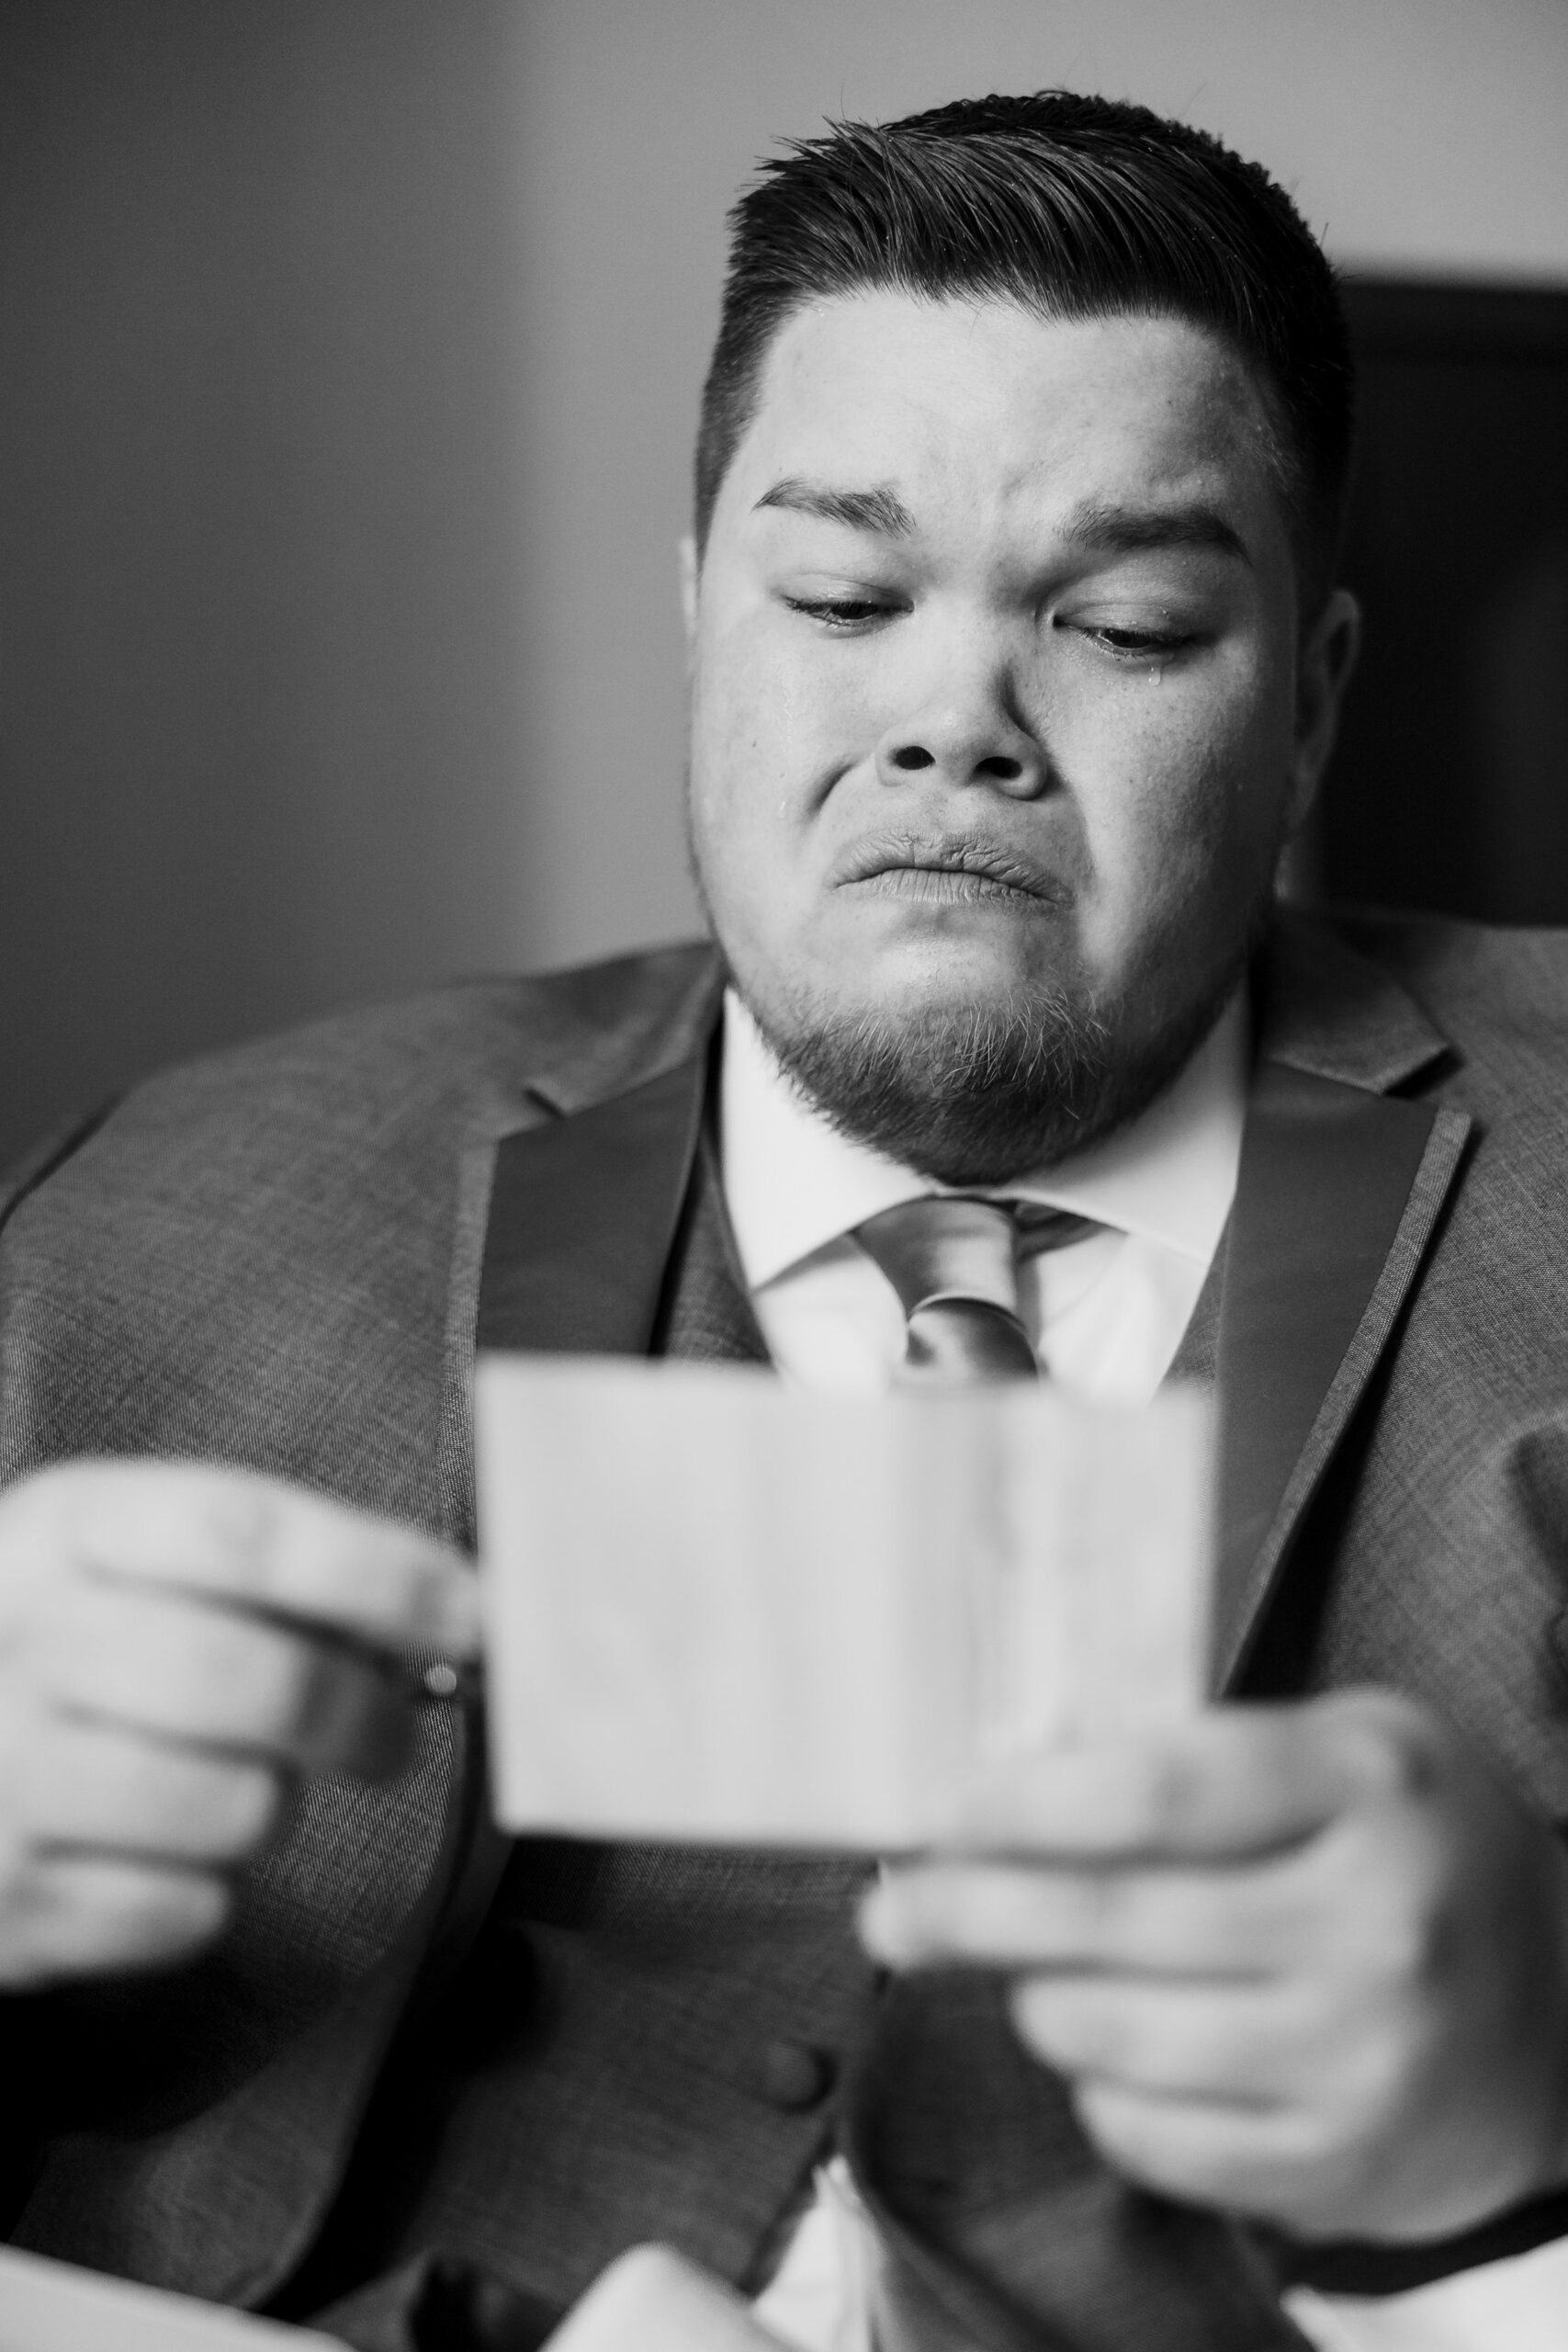 Groom gets emotional readying a letter before his wedding at the Destihl Brewery in Normal, Illinois.